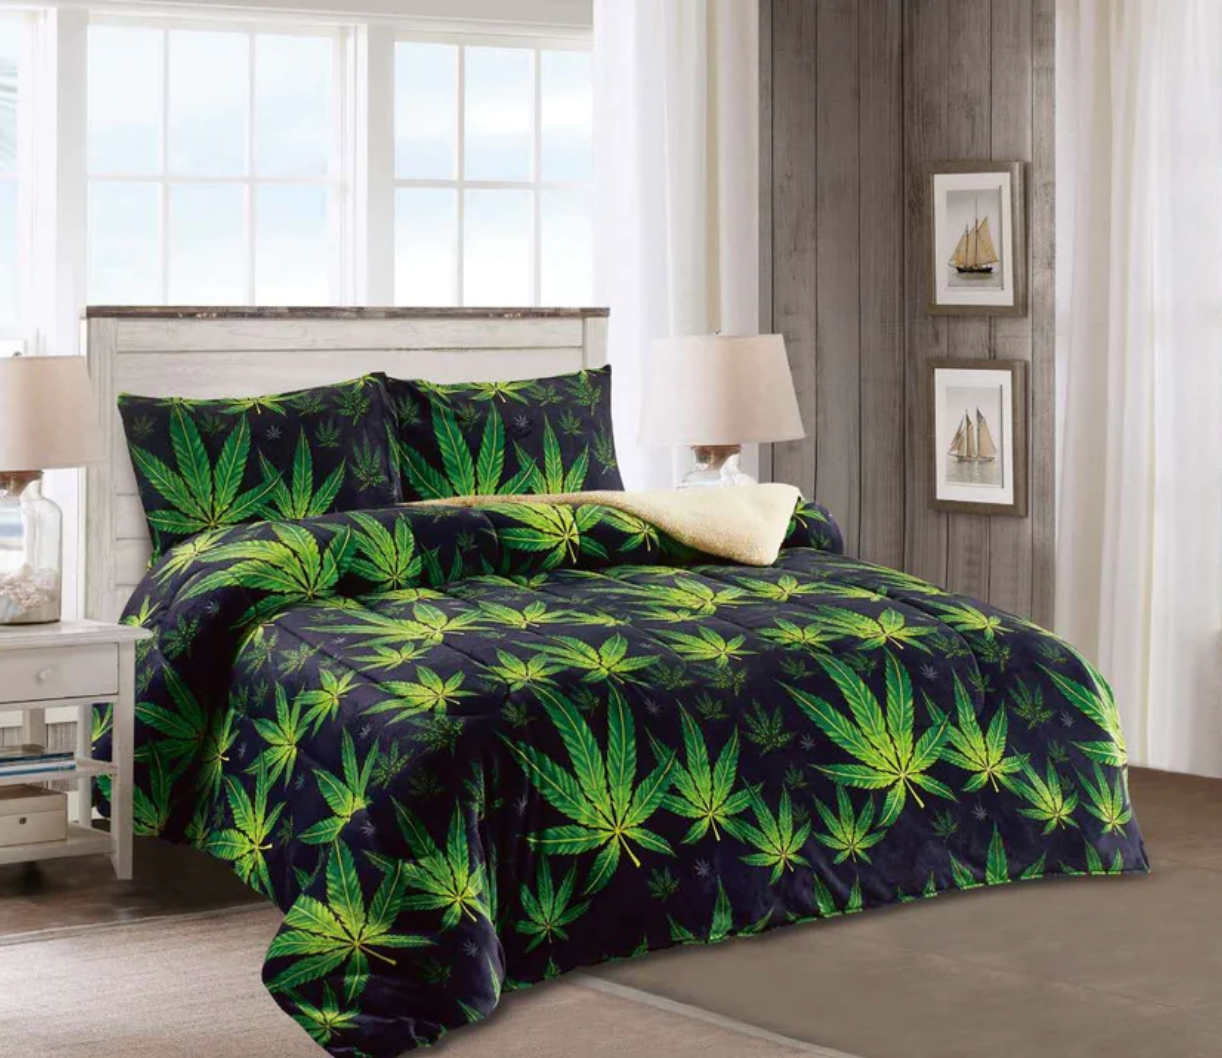 Queen Supper Soft 3 pcs Printing Borrego Blanket Cannabis Print - Blanket with 2 Pillow Covers